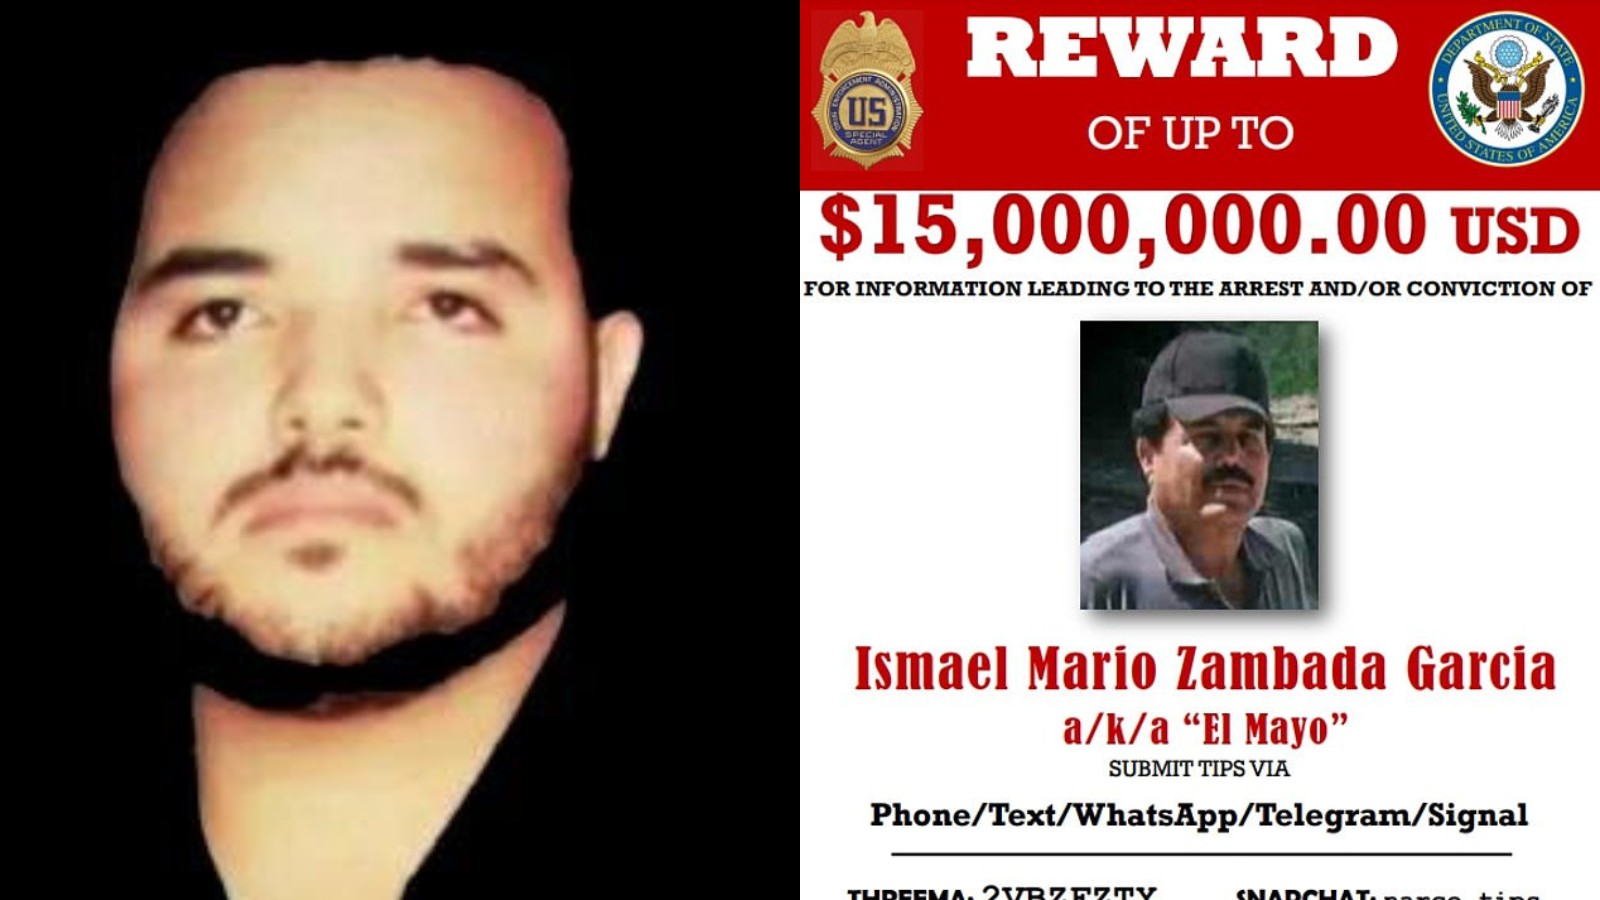 Sinaloa Cartel Leader El Mayo's Son Wants a Deal to Stay in the US